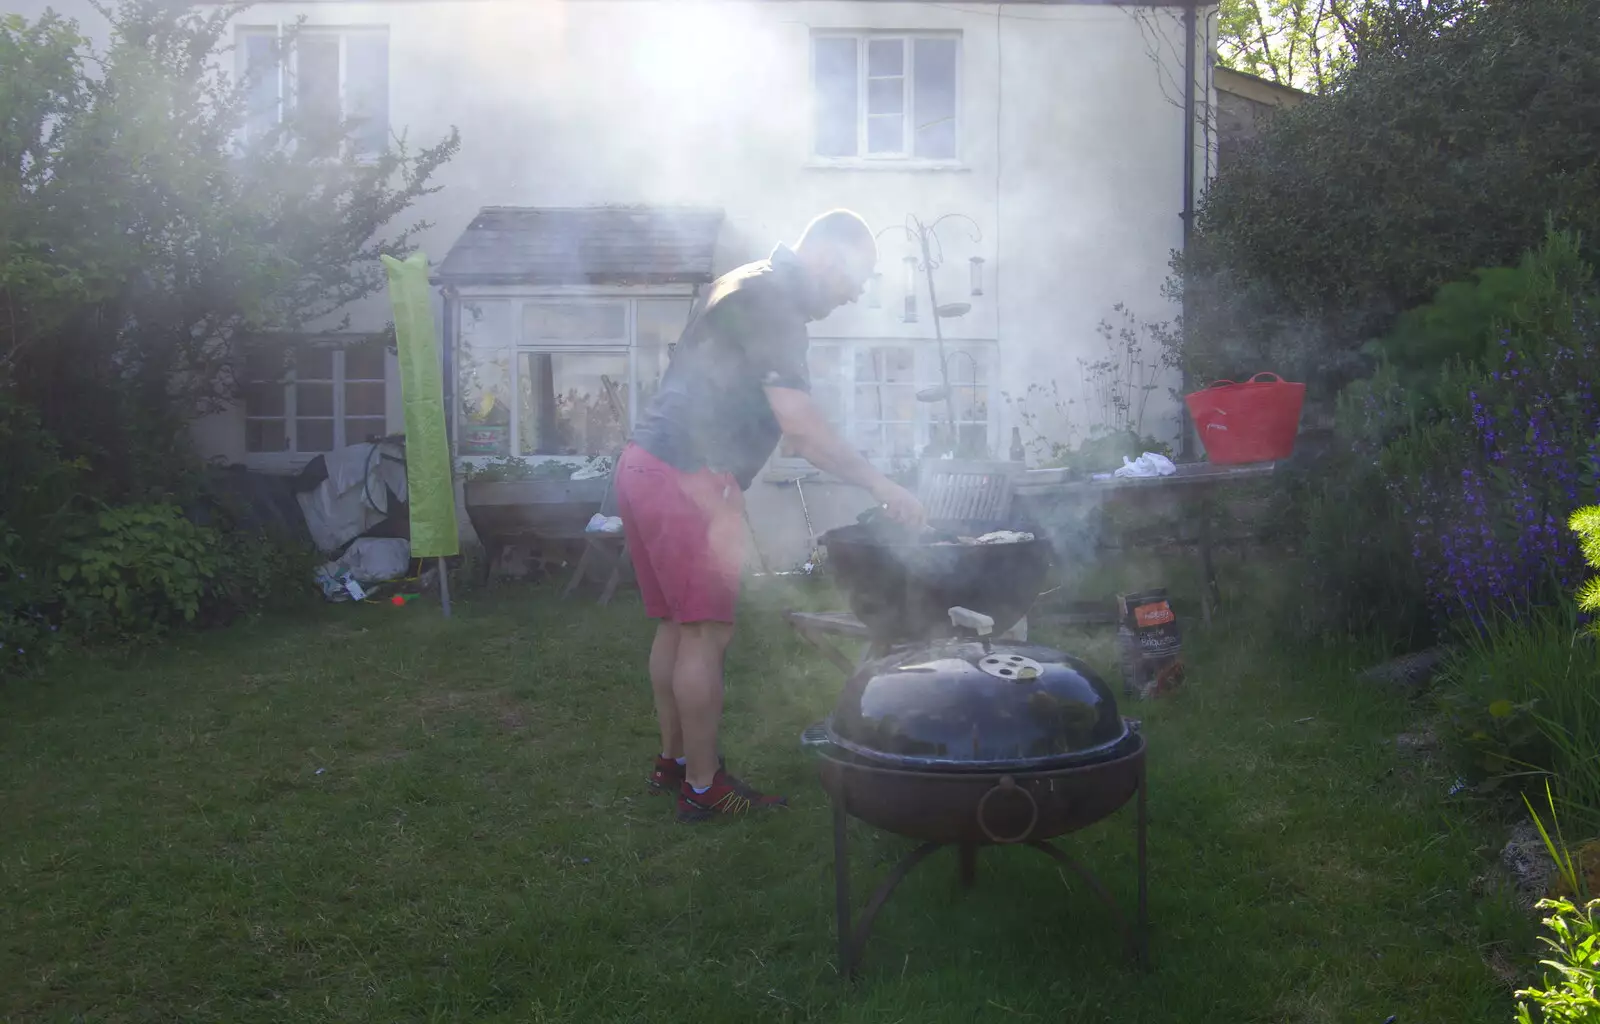 Matt gets the barbeque going, from Chagford Lido and a Trip to Parke, Bovey Tracey, Devon - 25th May 2019